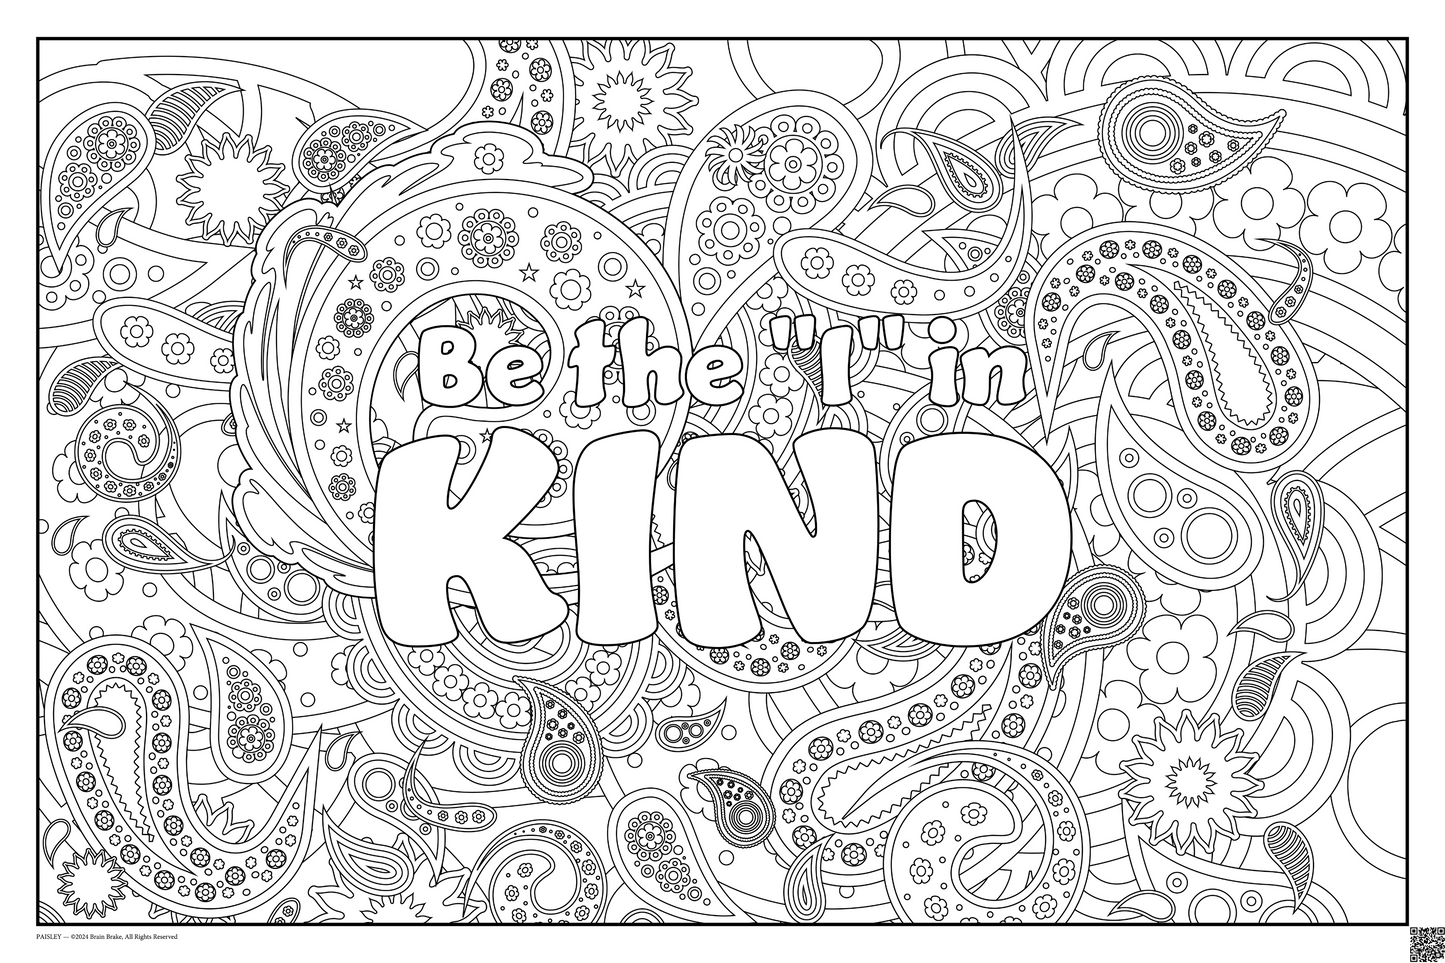 Build Community: Be the "I" in KIND